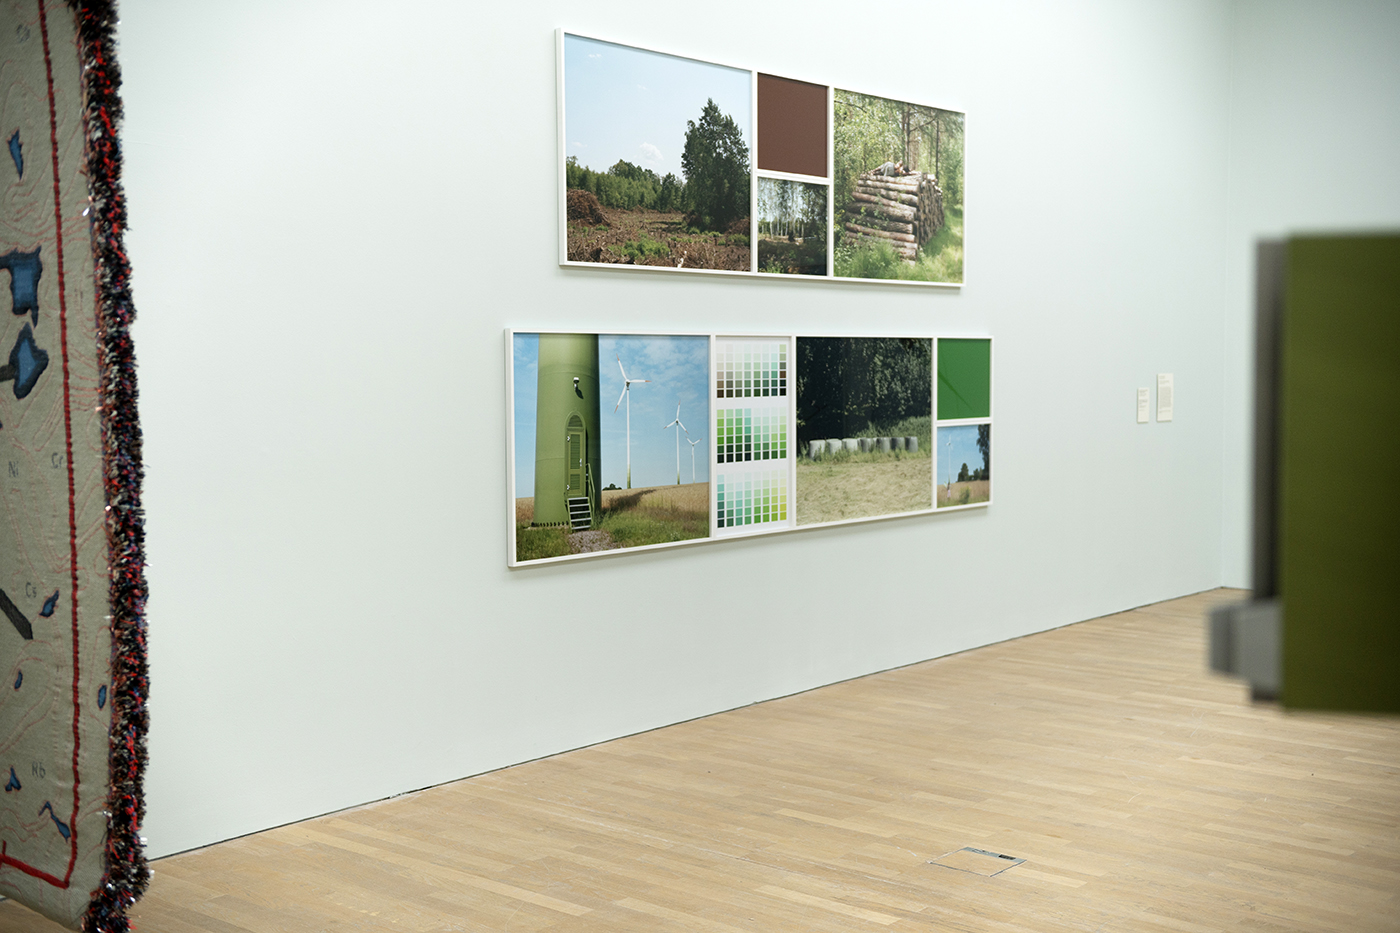 Otobong Nkanga - Emptied Remains (Color of Nature is definitely Green), 2004-2015